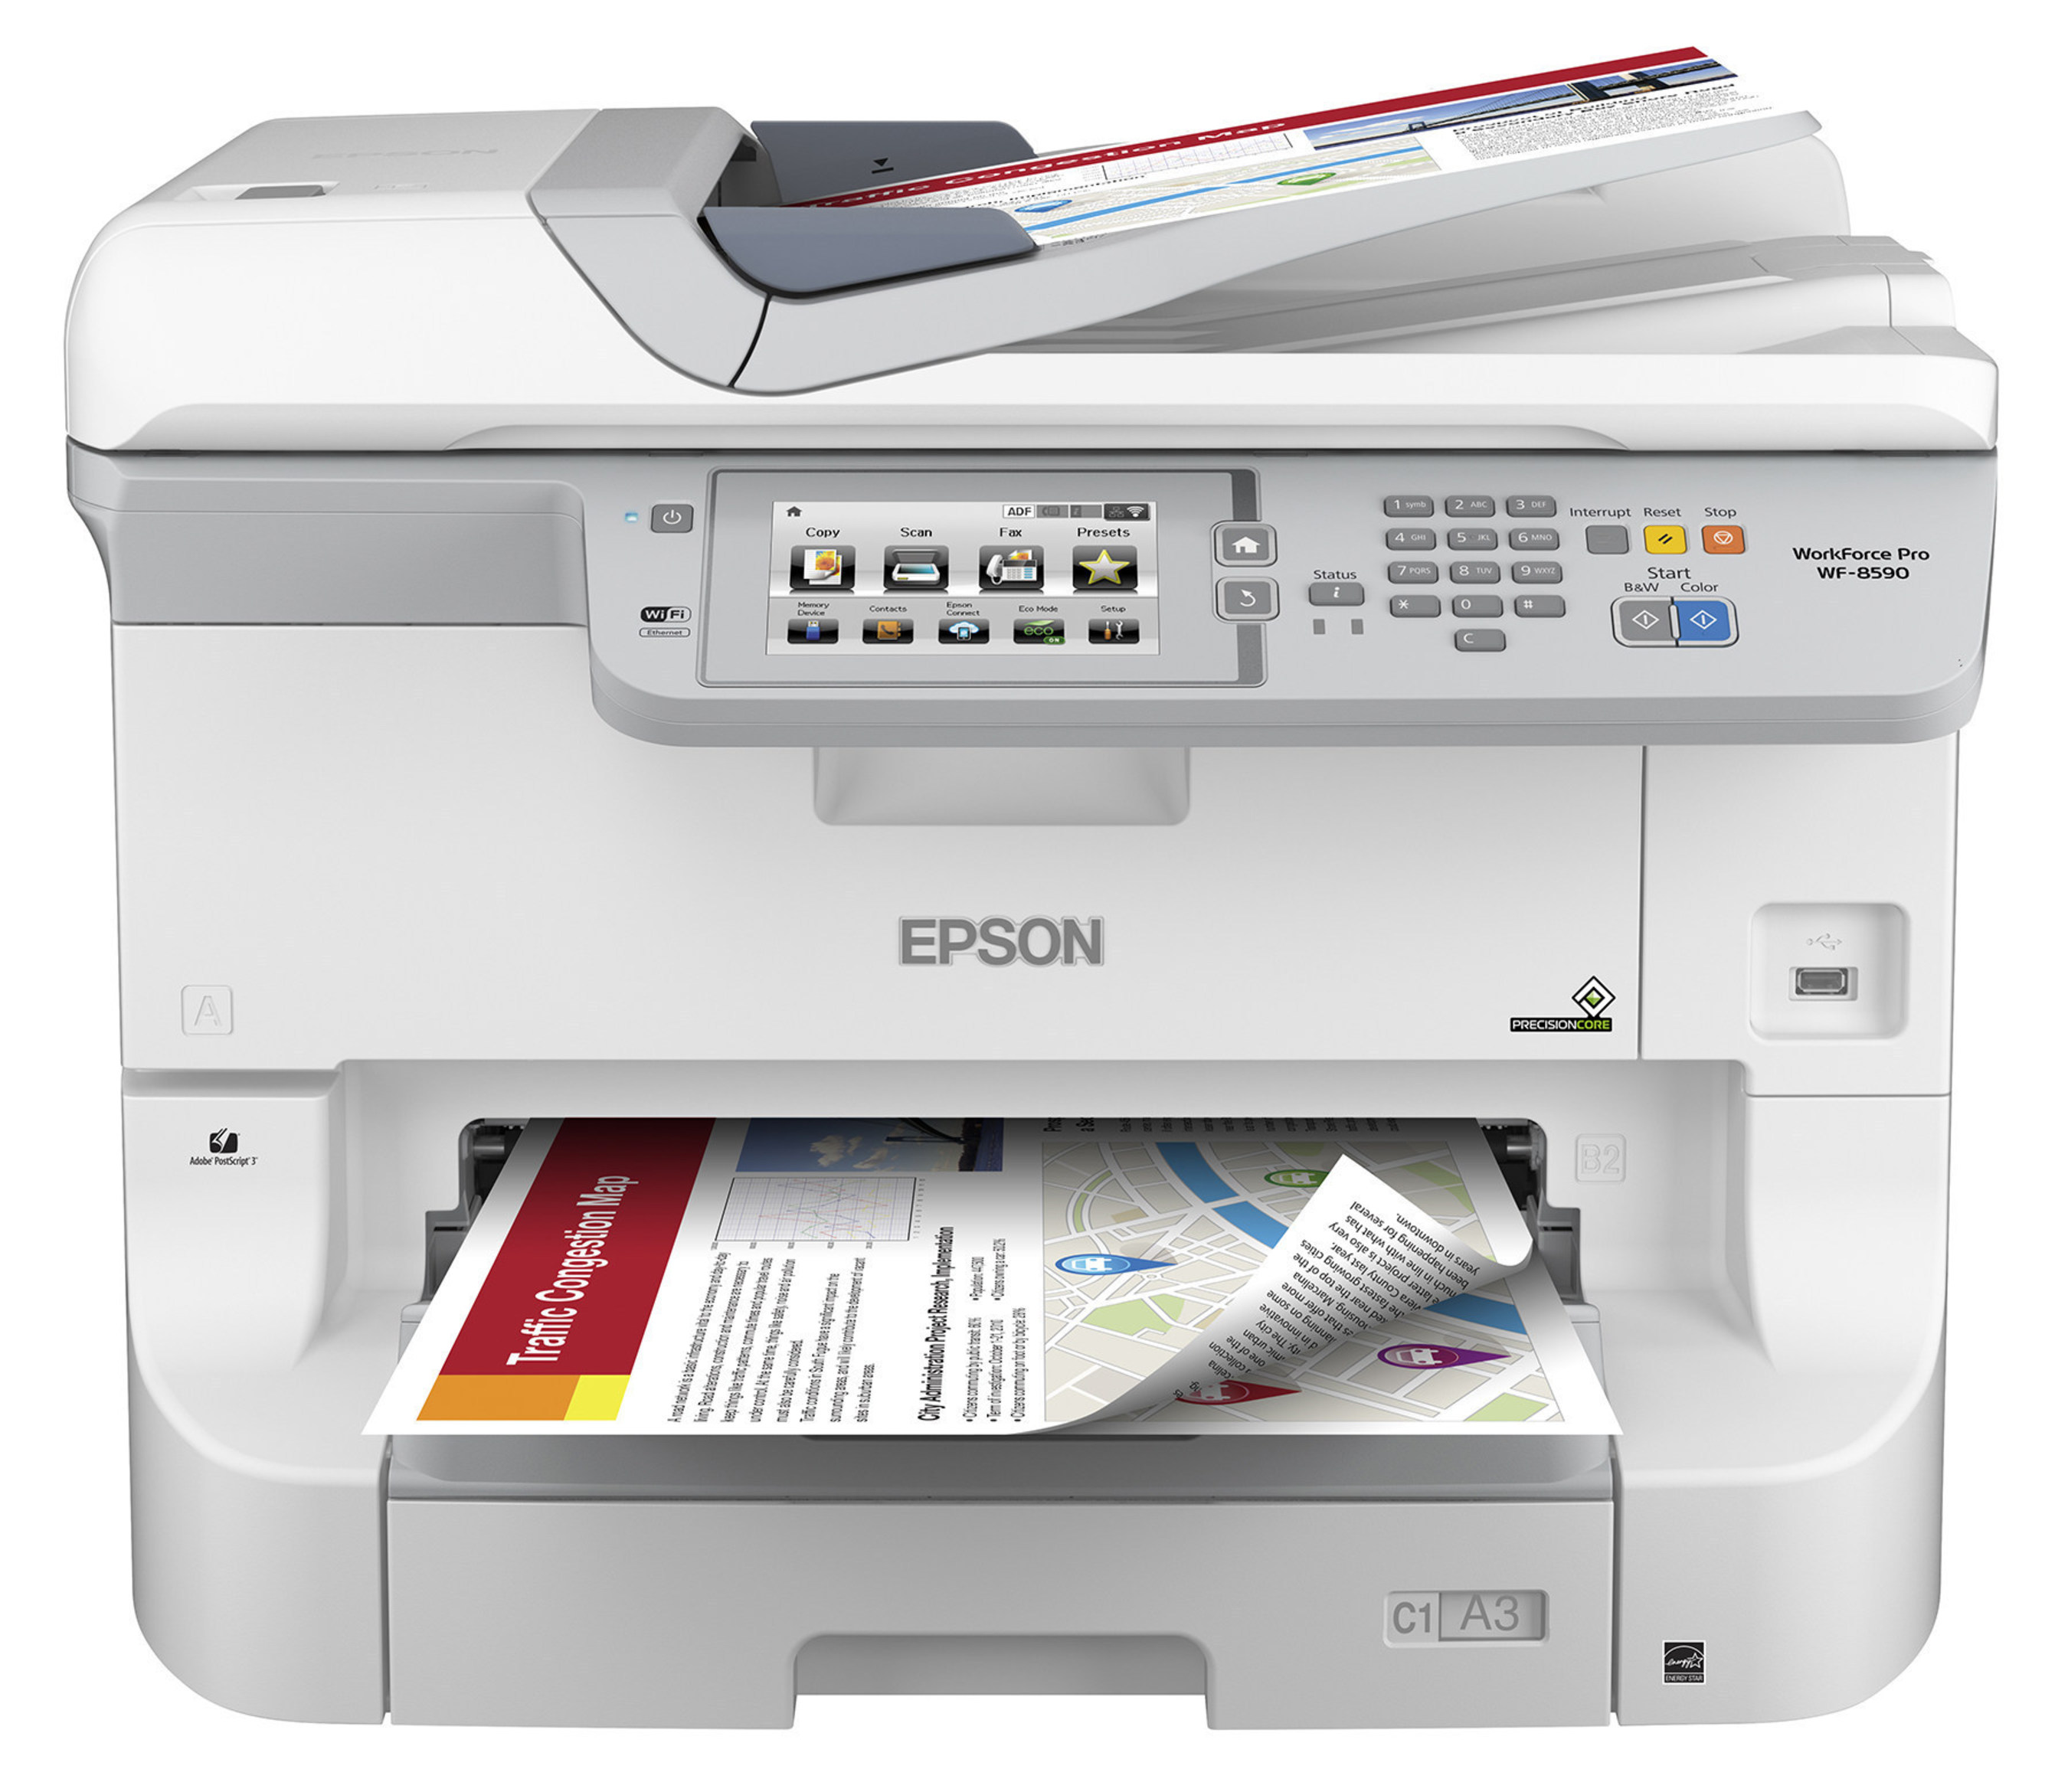 Epson Introduces Heavy Duty A3 Color Workgroup Printer and MFP Powered